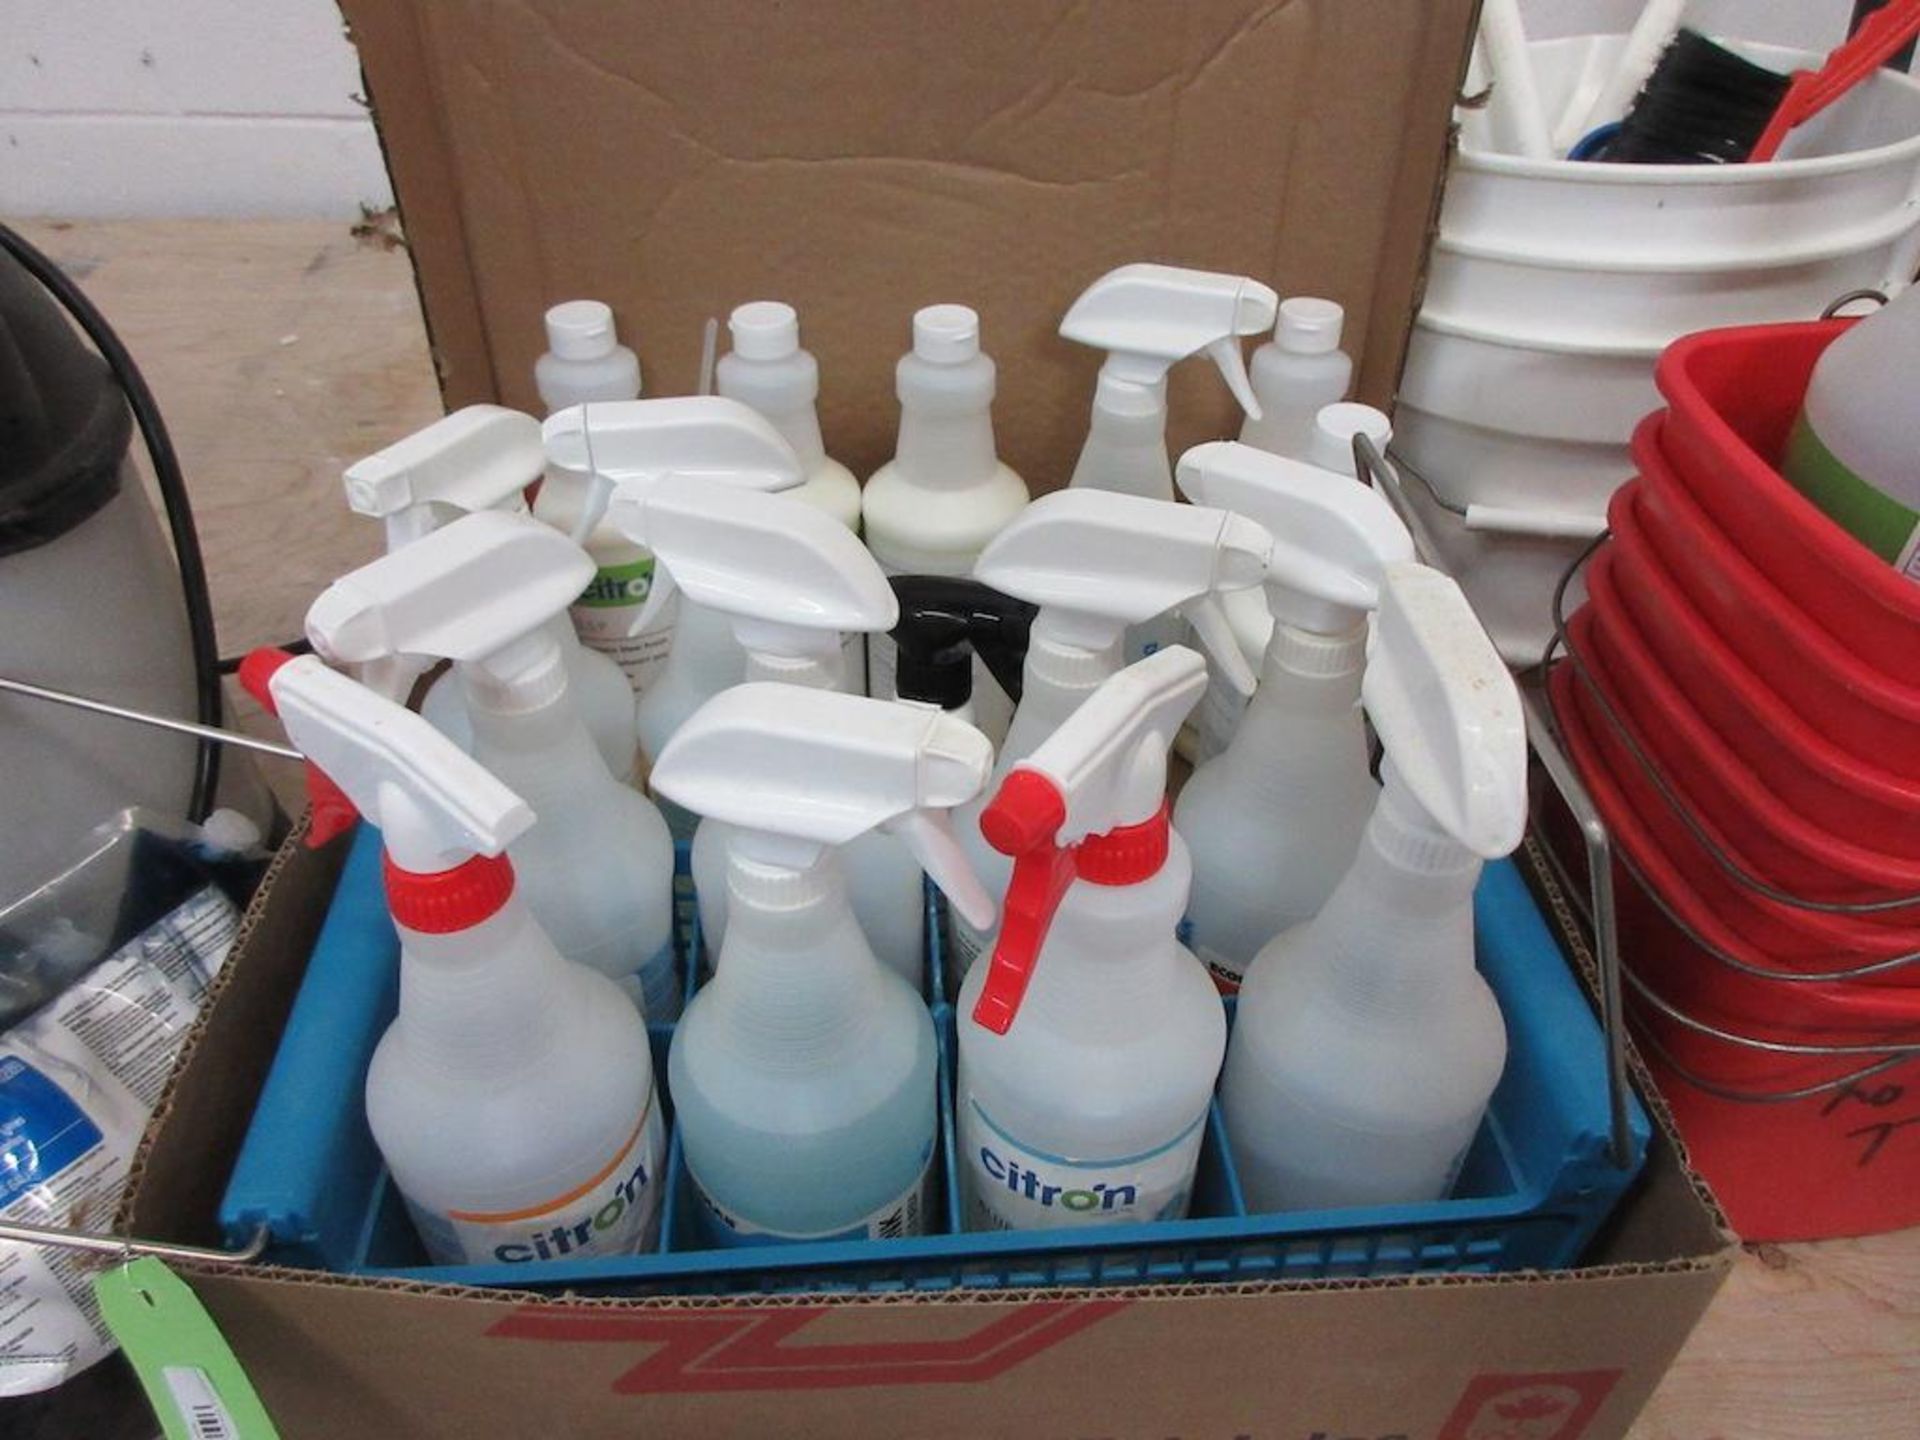 Lot Ecolab sprayer, chemicals, cleaning supplies etc. - Image 4 of 7